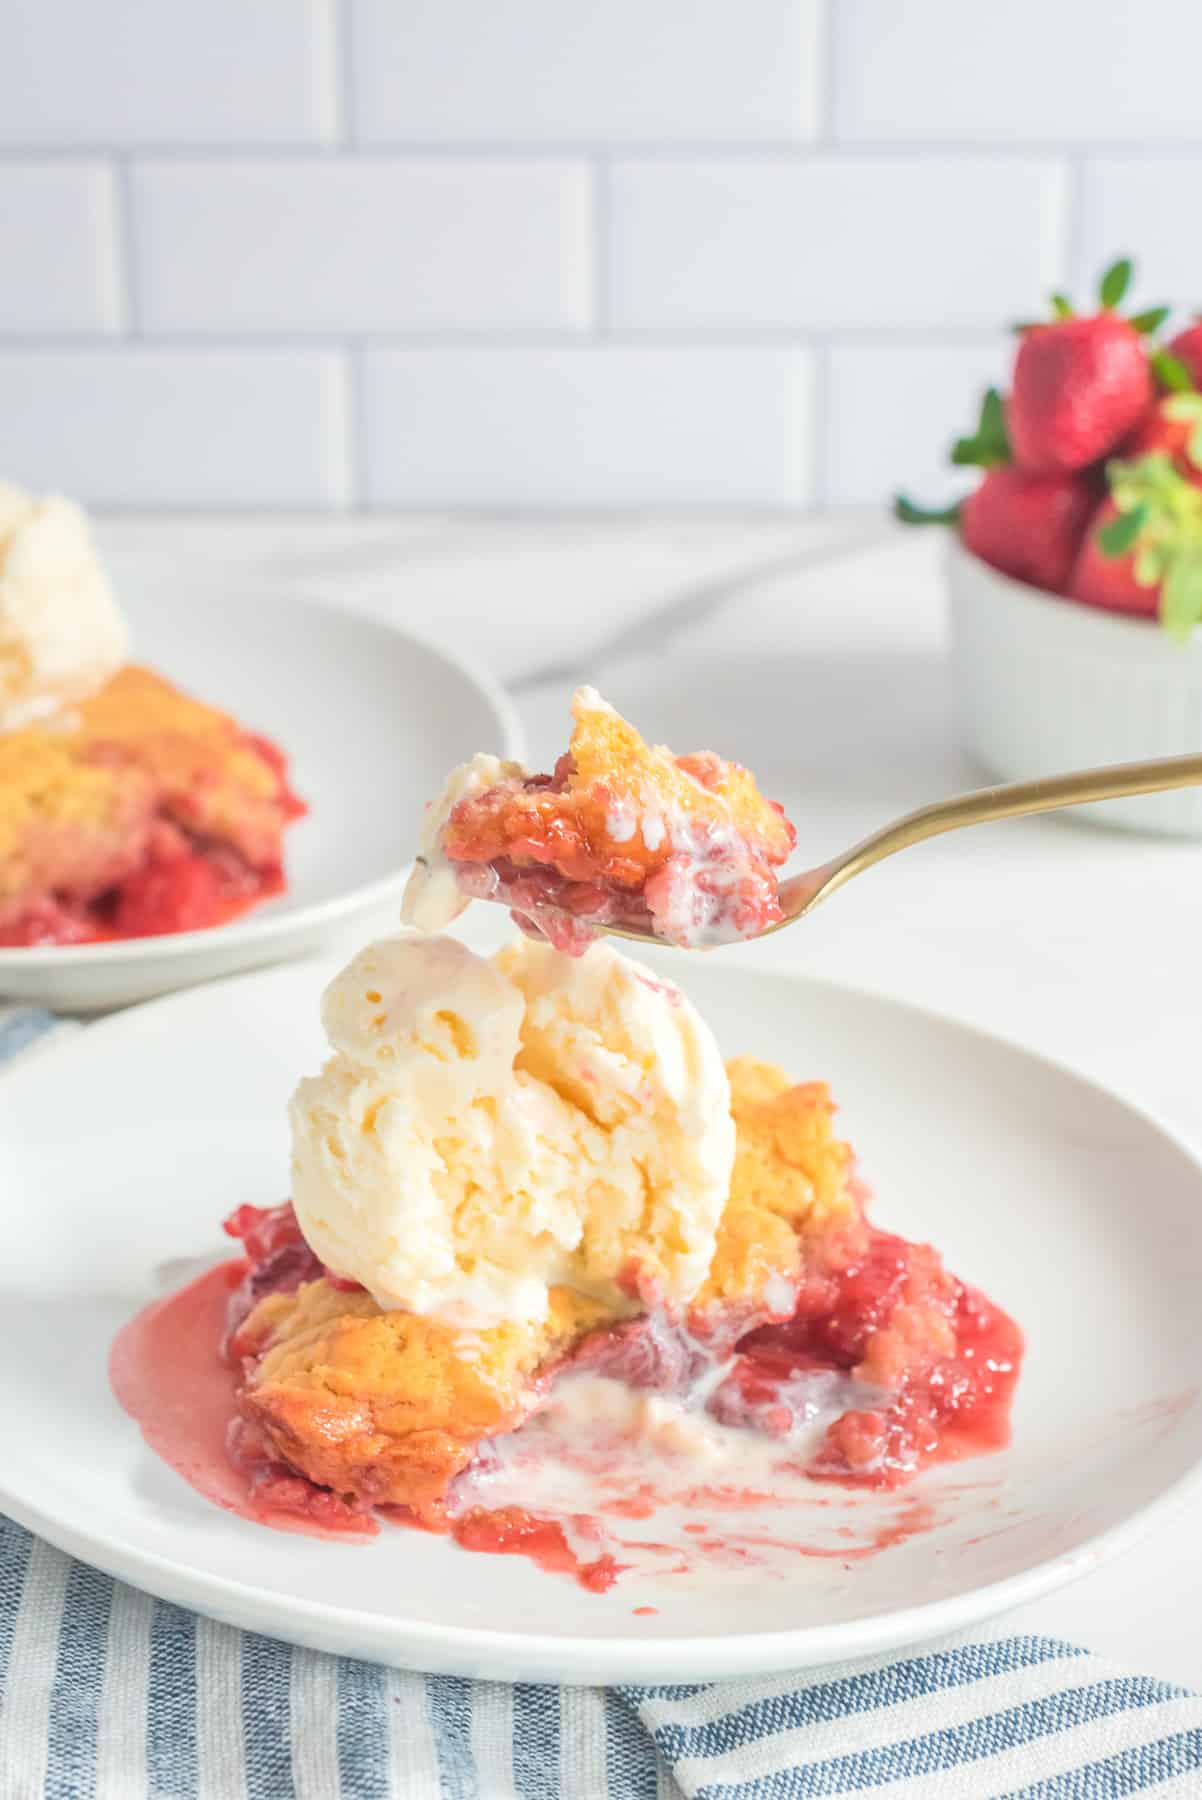 A fork full of strawberry cobbler and ice cream being scooped from a plate on a counter from the side.